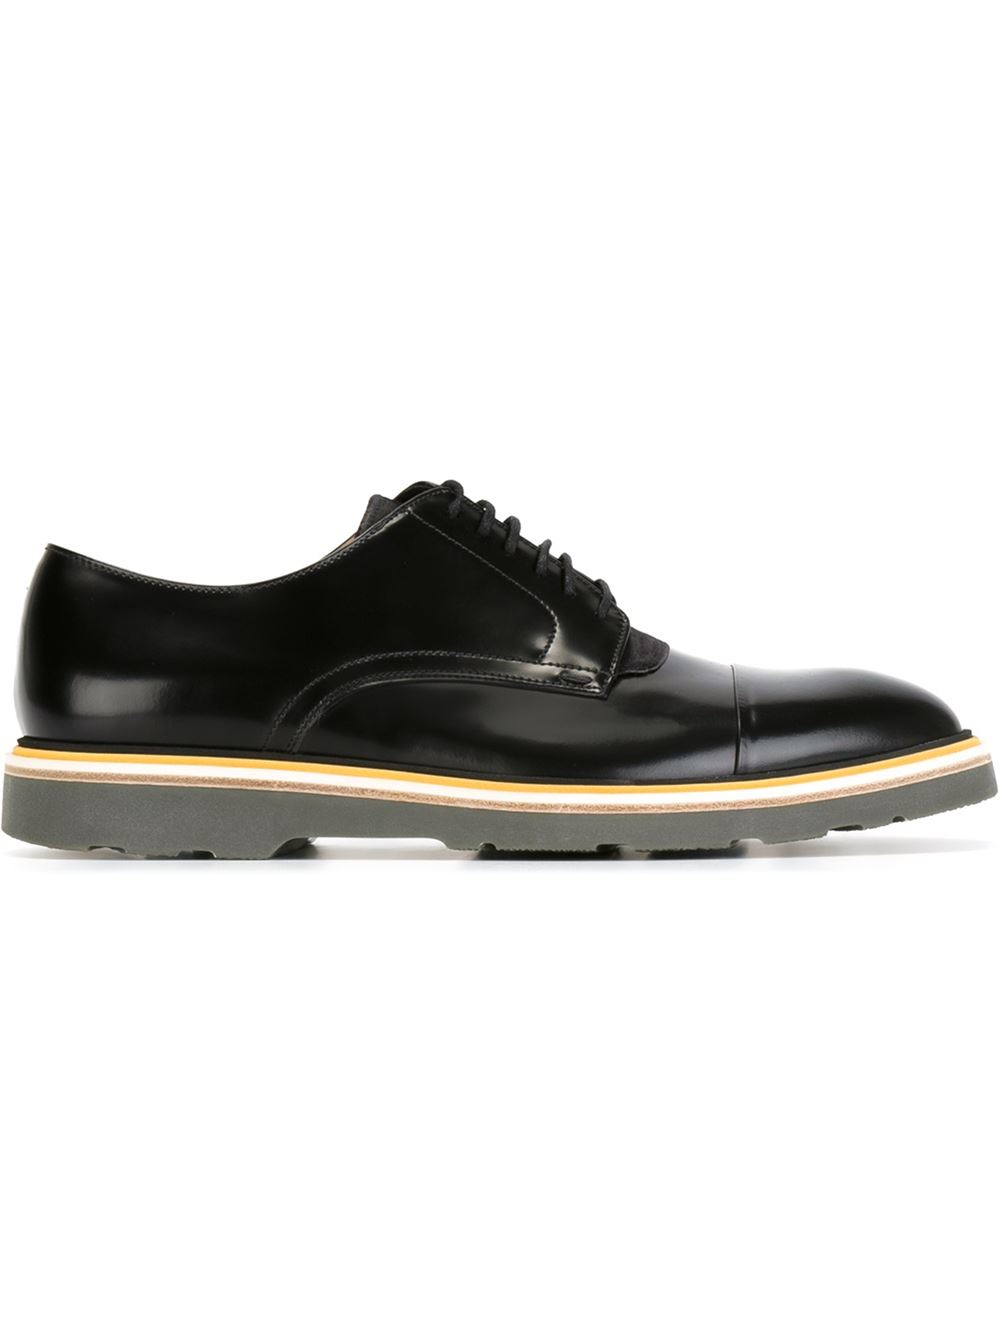 Lyst - Paul smith Black Shoes in Black for Men